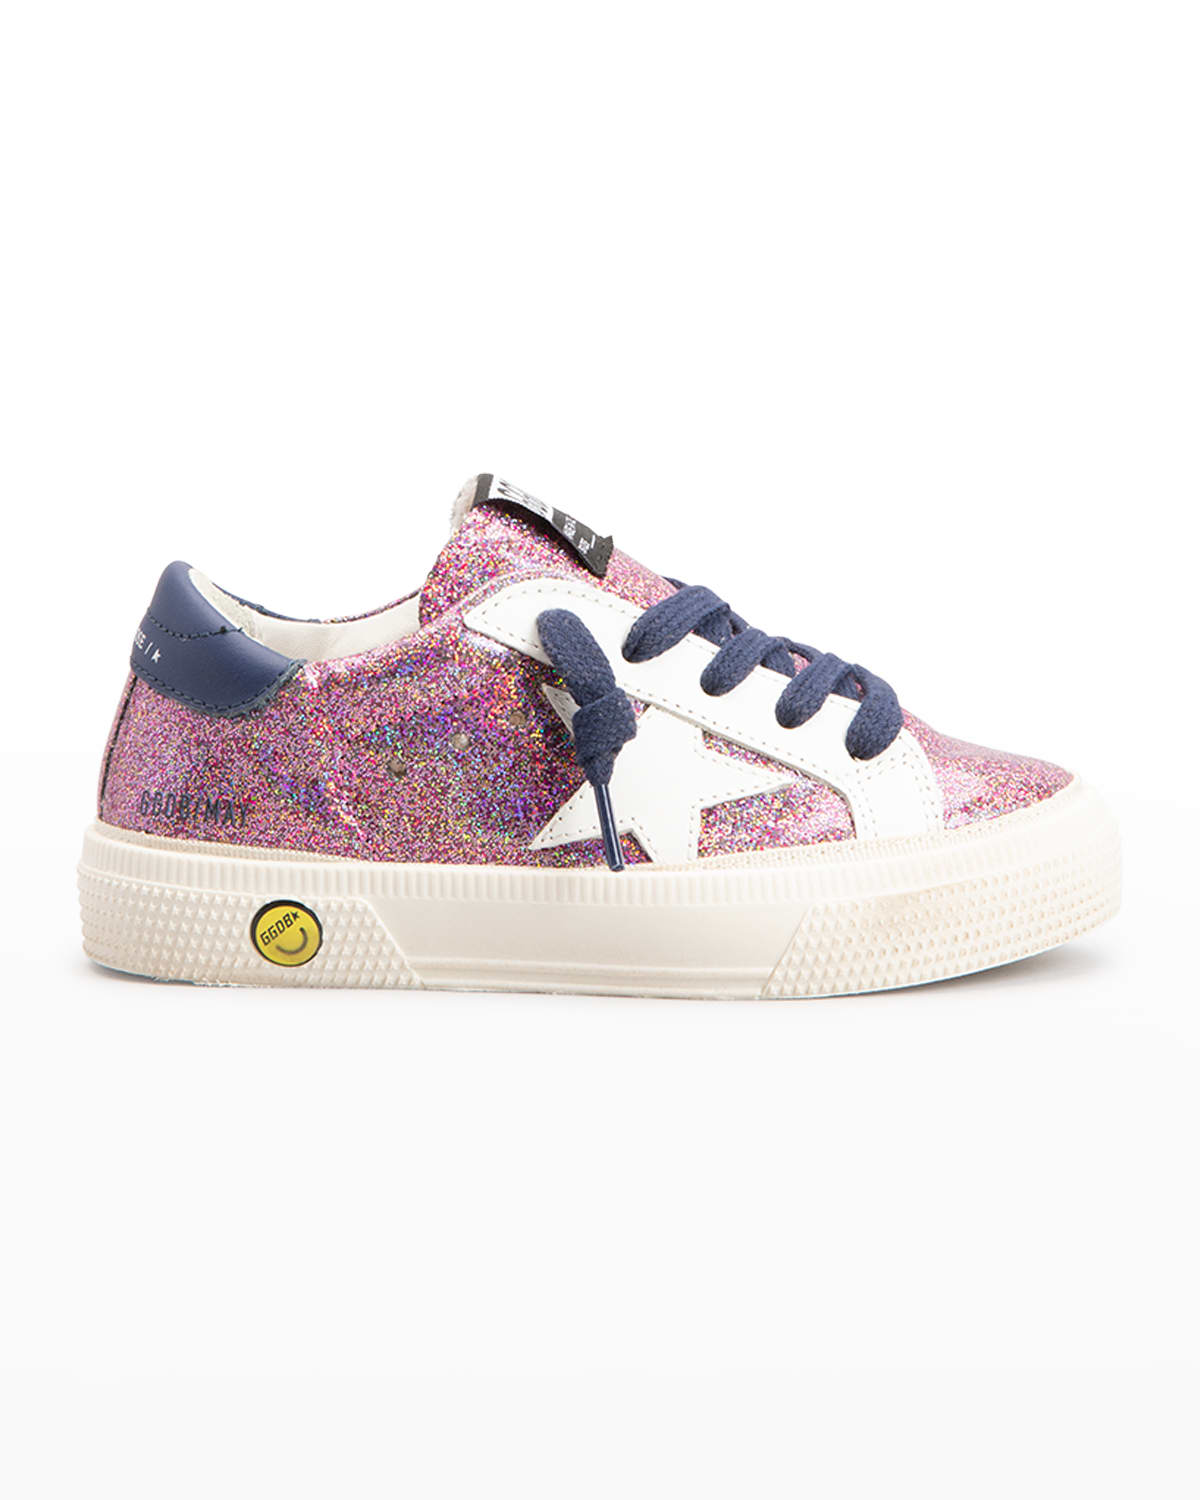 Girl's May Glitter Star Sneakers, Size Toddler/Kids | Neiman Marcus